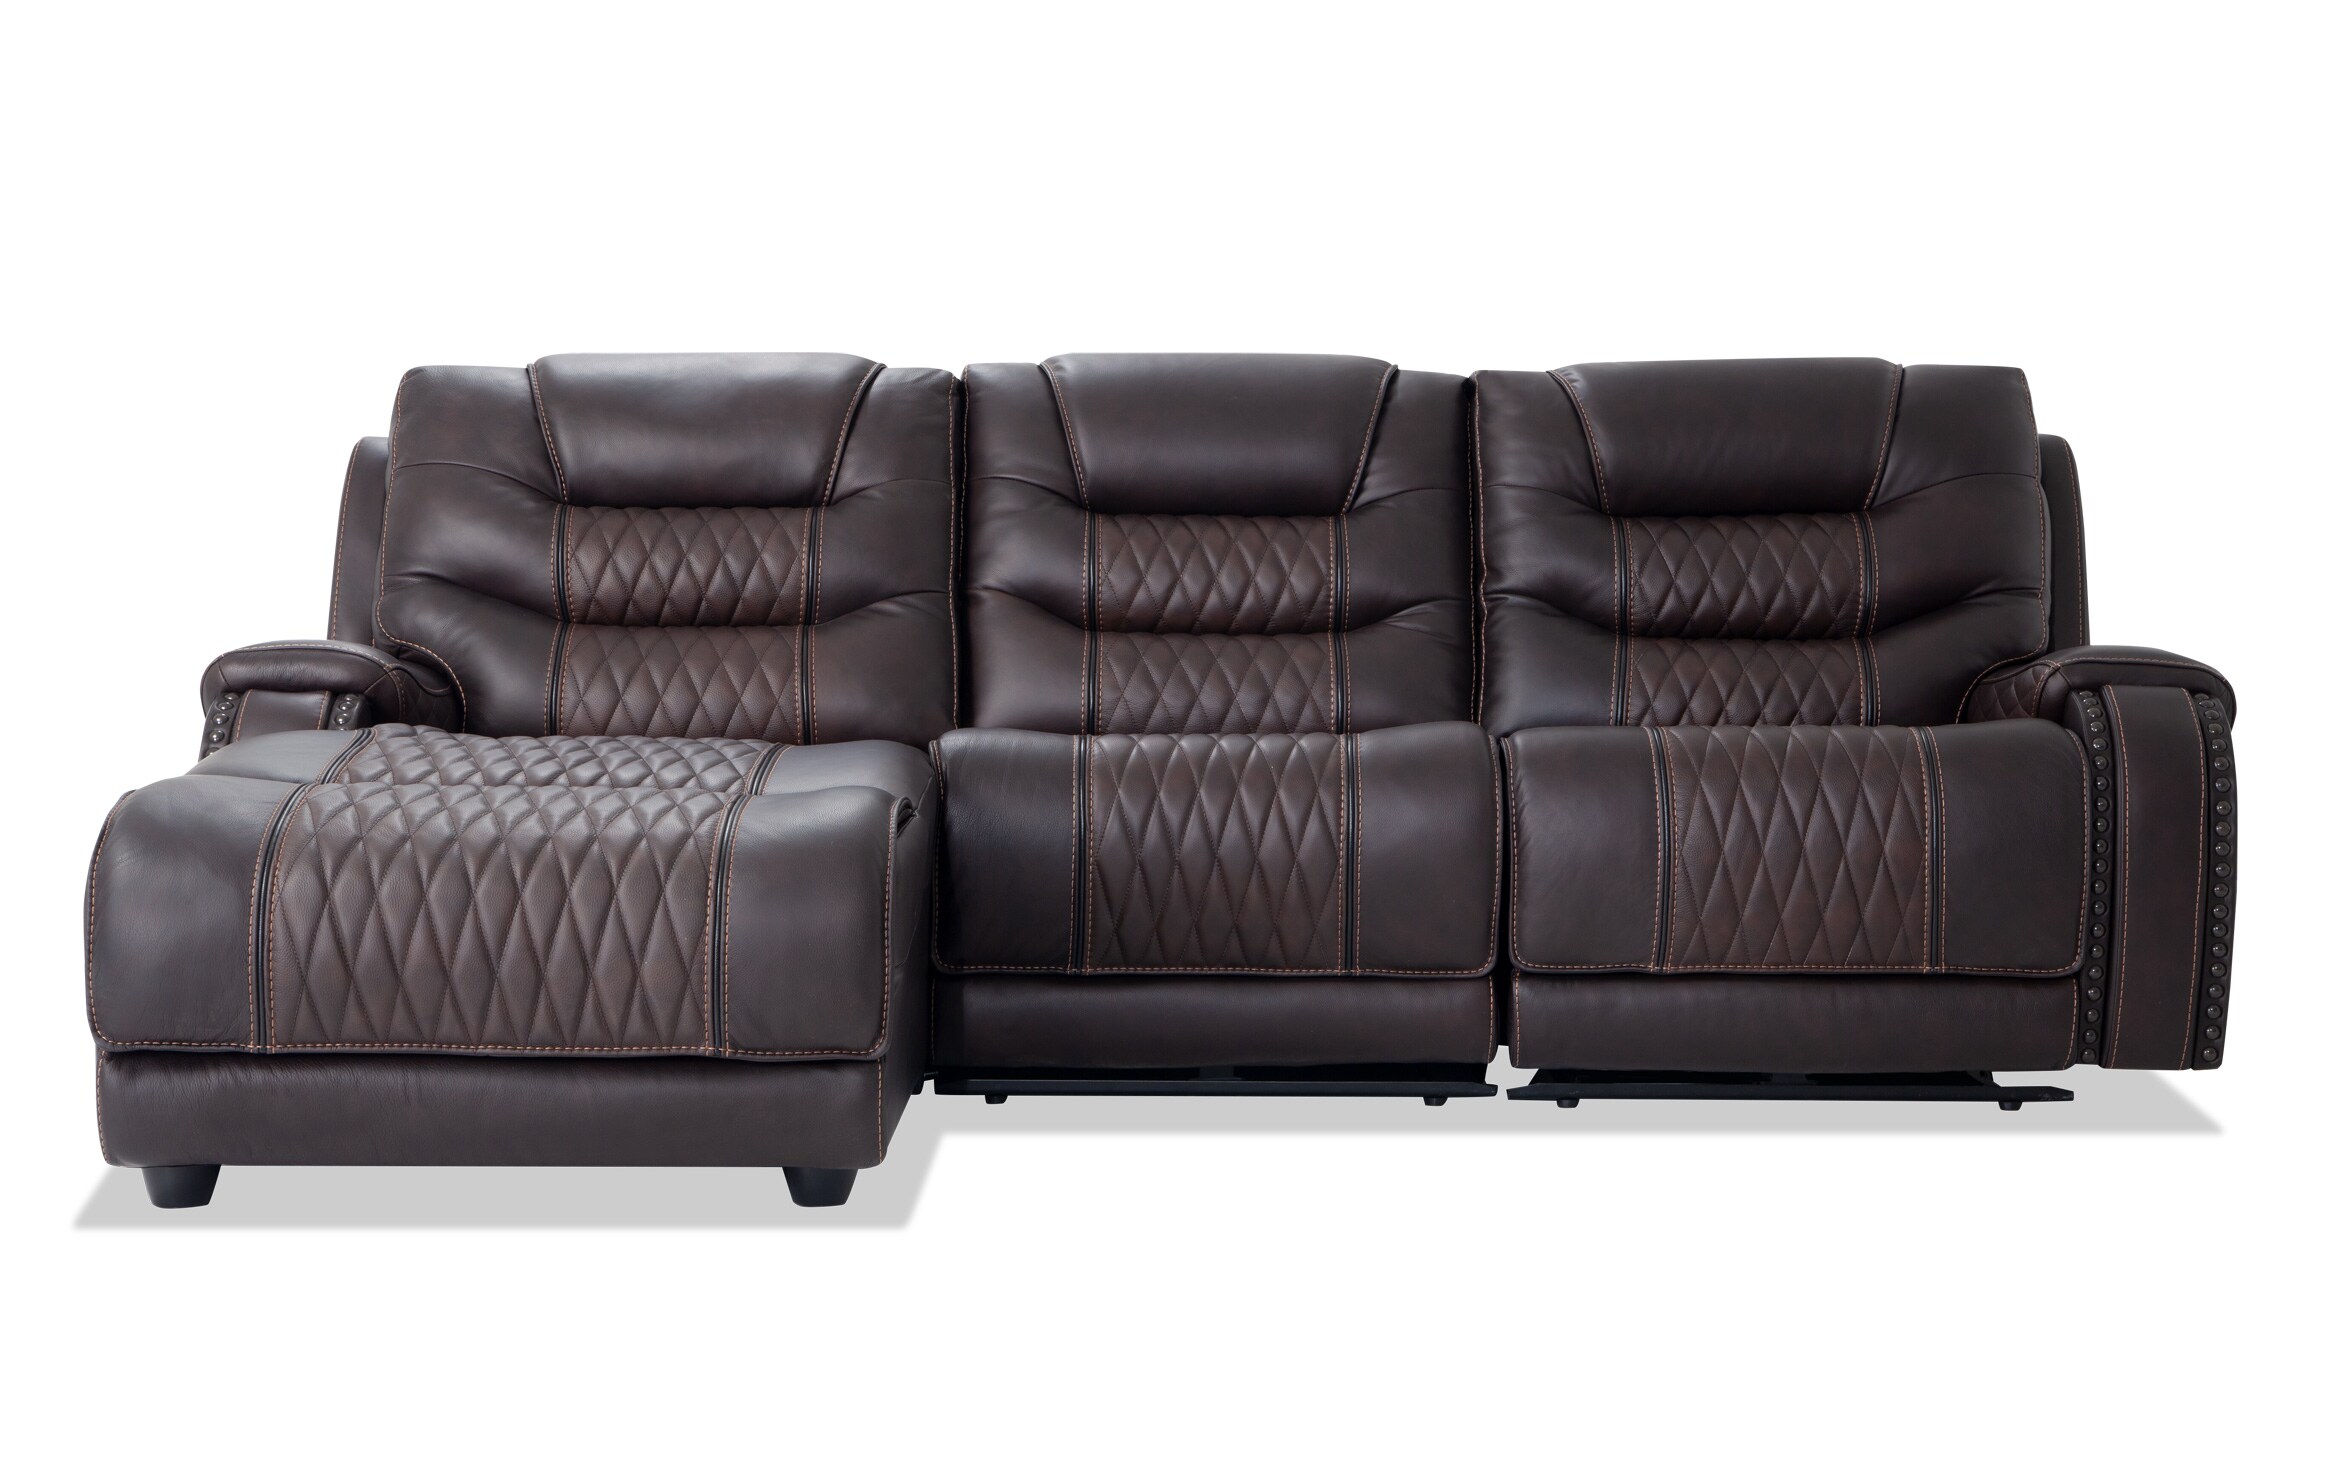 Walker Espresso 3 Piece Power Reclining Right Arm Facing Sectional Bob S Discount Furniture